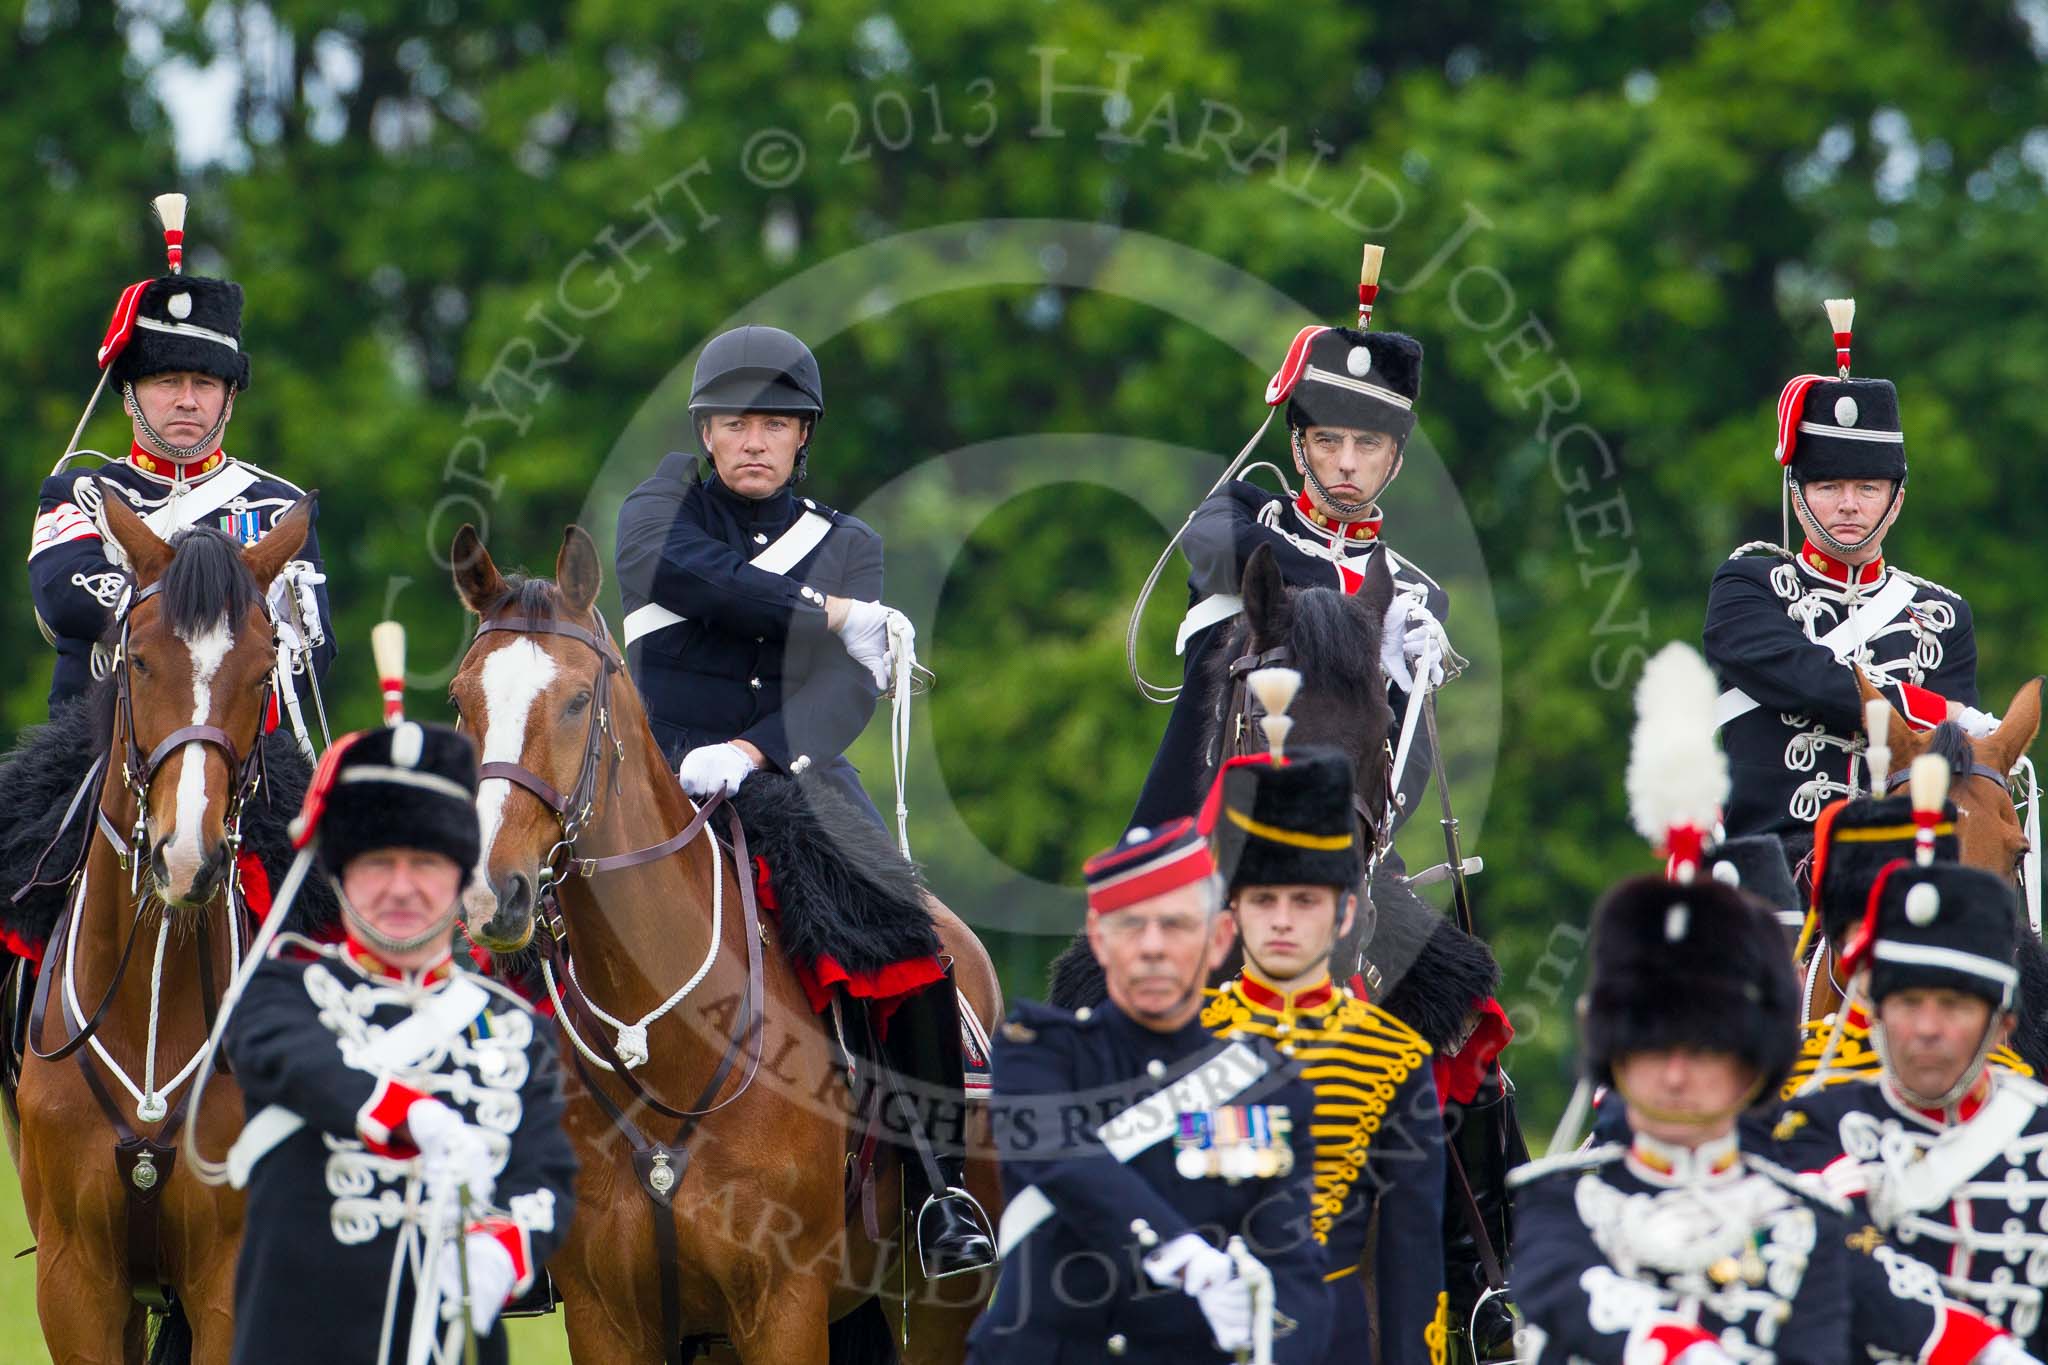 The Light Cavalry HAC Annual Review and Inspection 2013.
Windsor Great Park Review Ground,
Windsor,
Berkshire,
United Kingdom,
on 09 June 2013 at 13:02, image #286